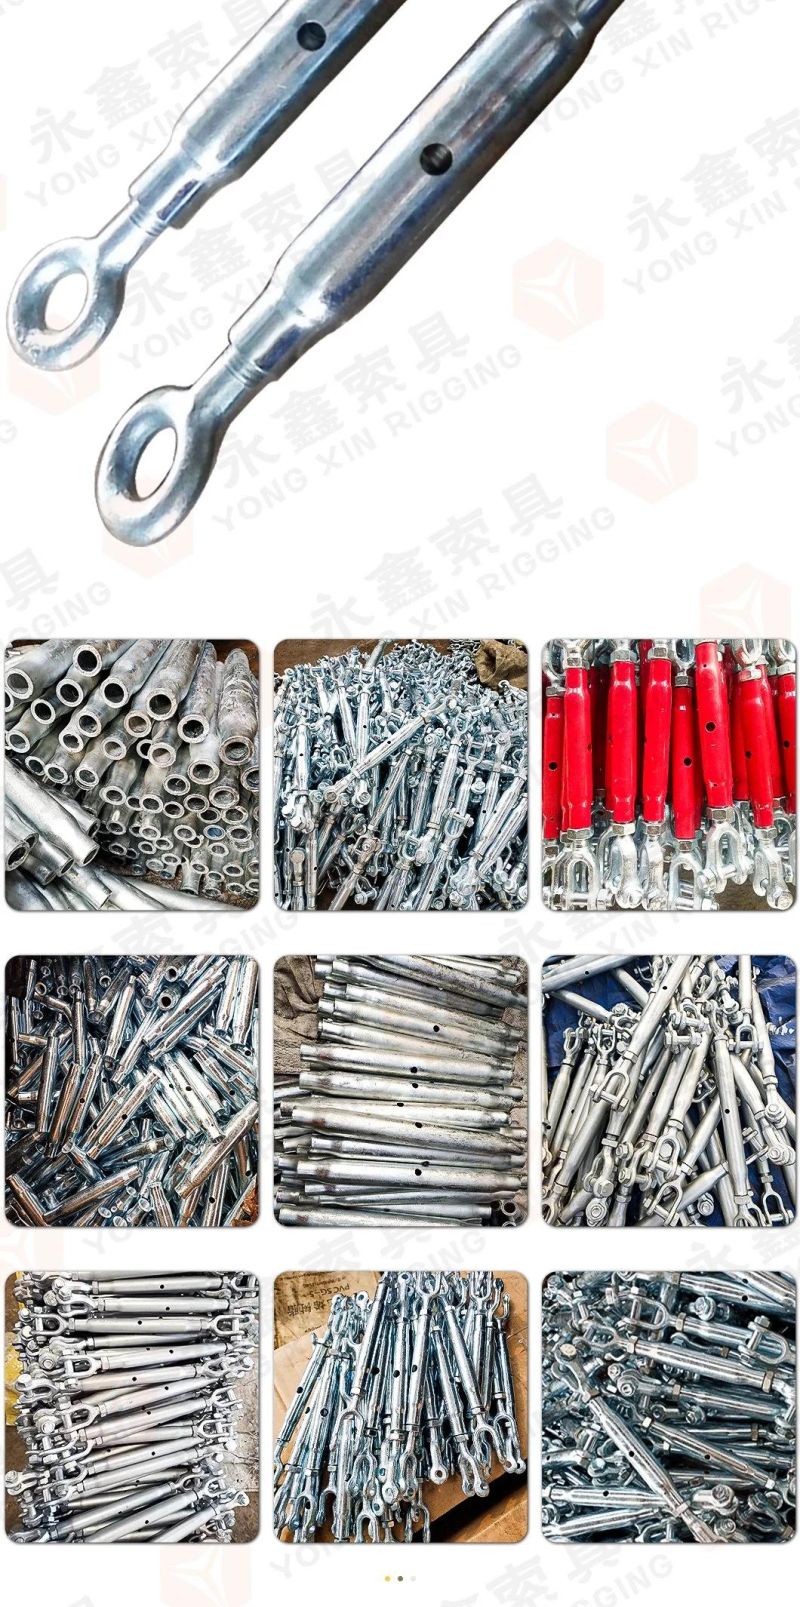 China High Strength European Type Rigging Screw DIN 1478 DIN1478 Carbon Steel Ratchet Close Body Turnbuckle